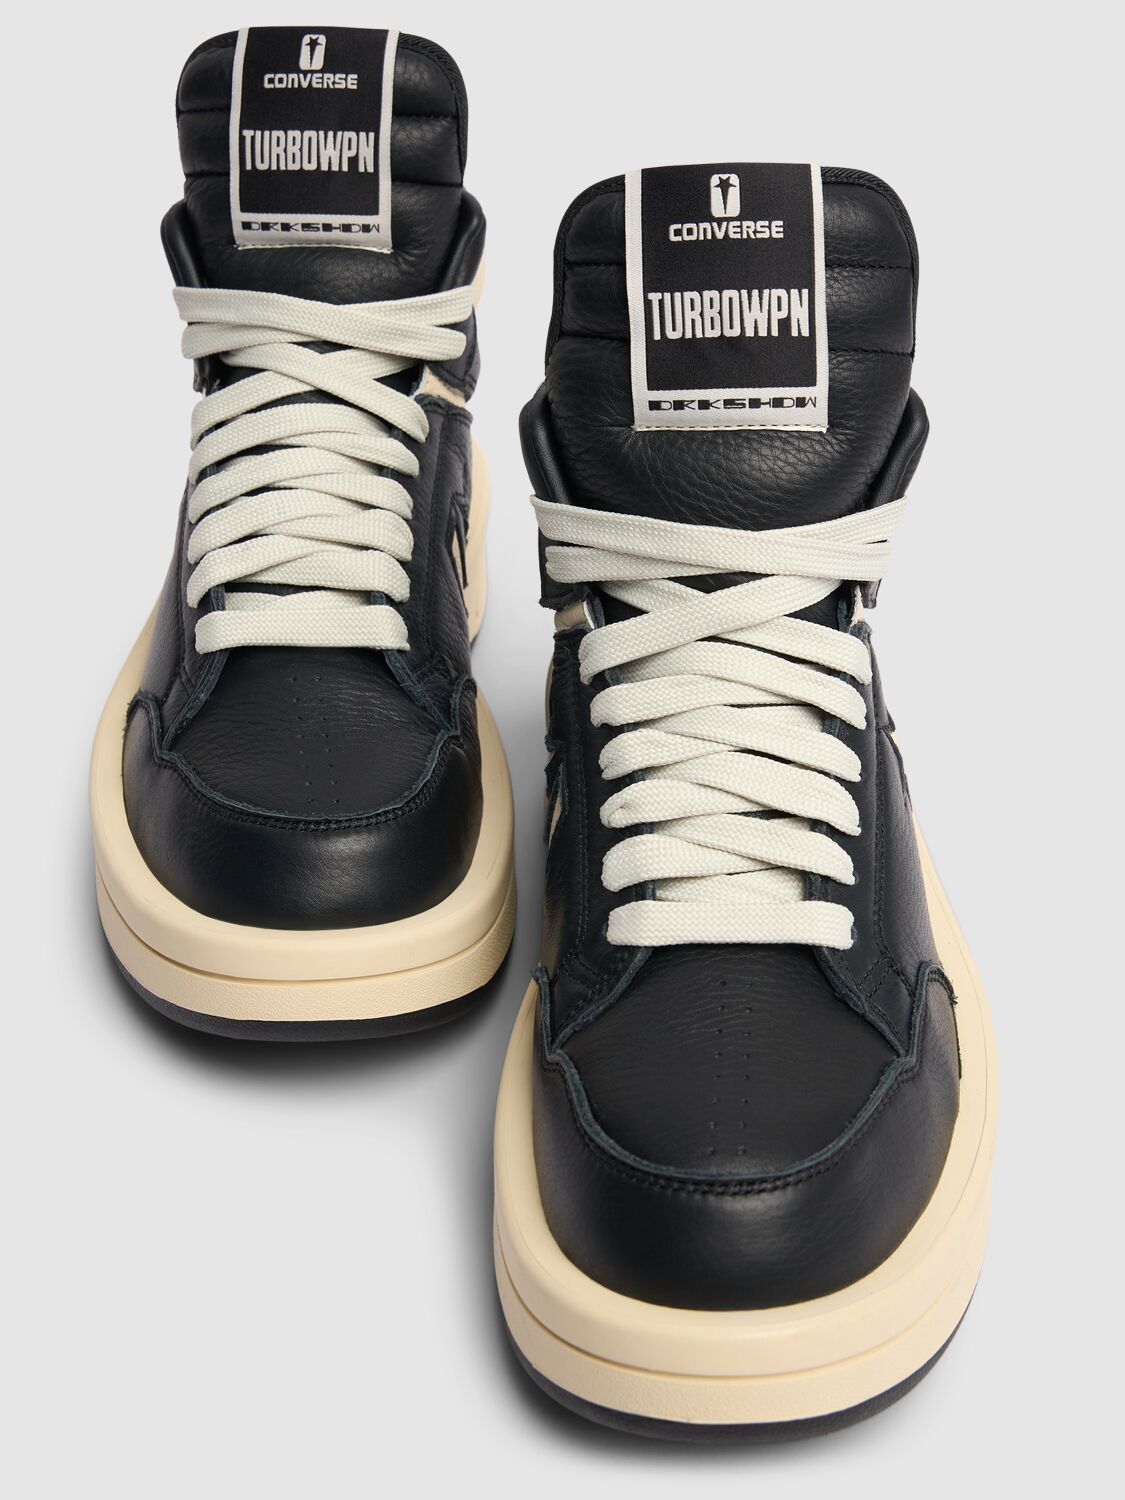 Shop Drkshdw X Converse Turbowpn Leather Sneakers In Black,white